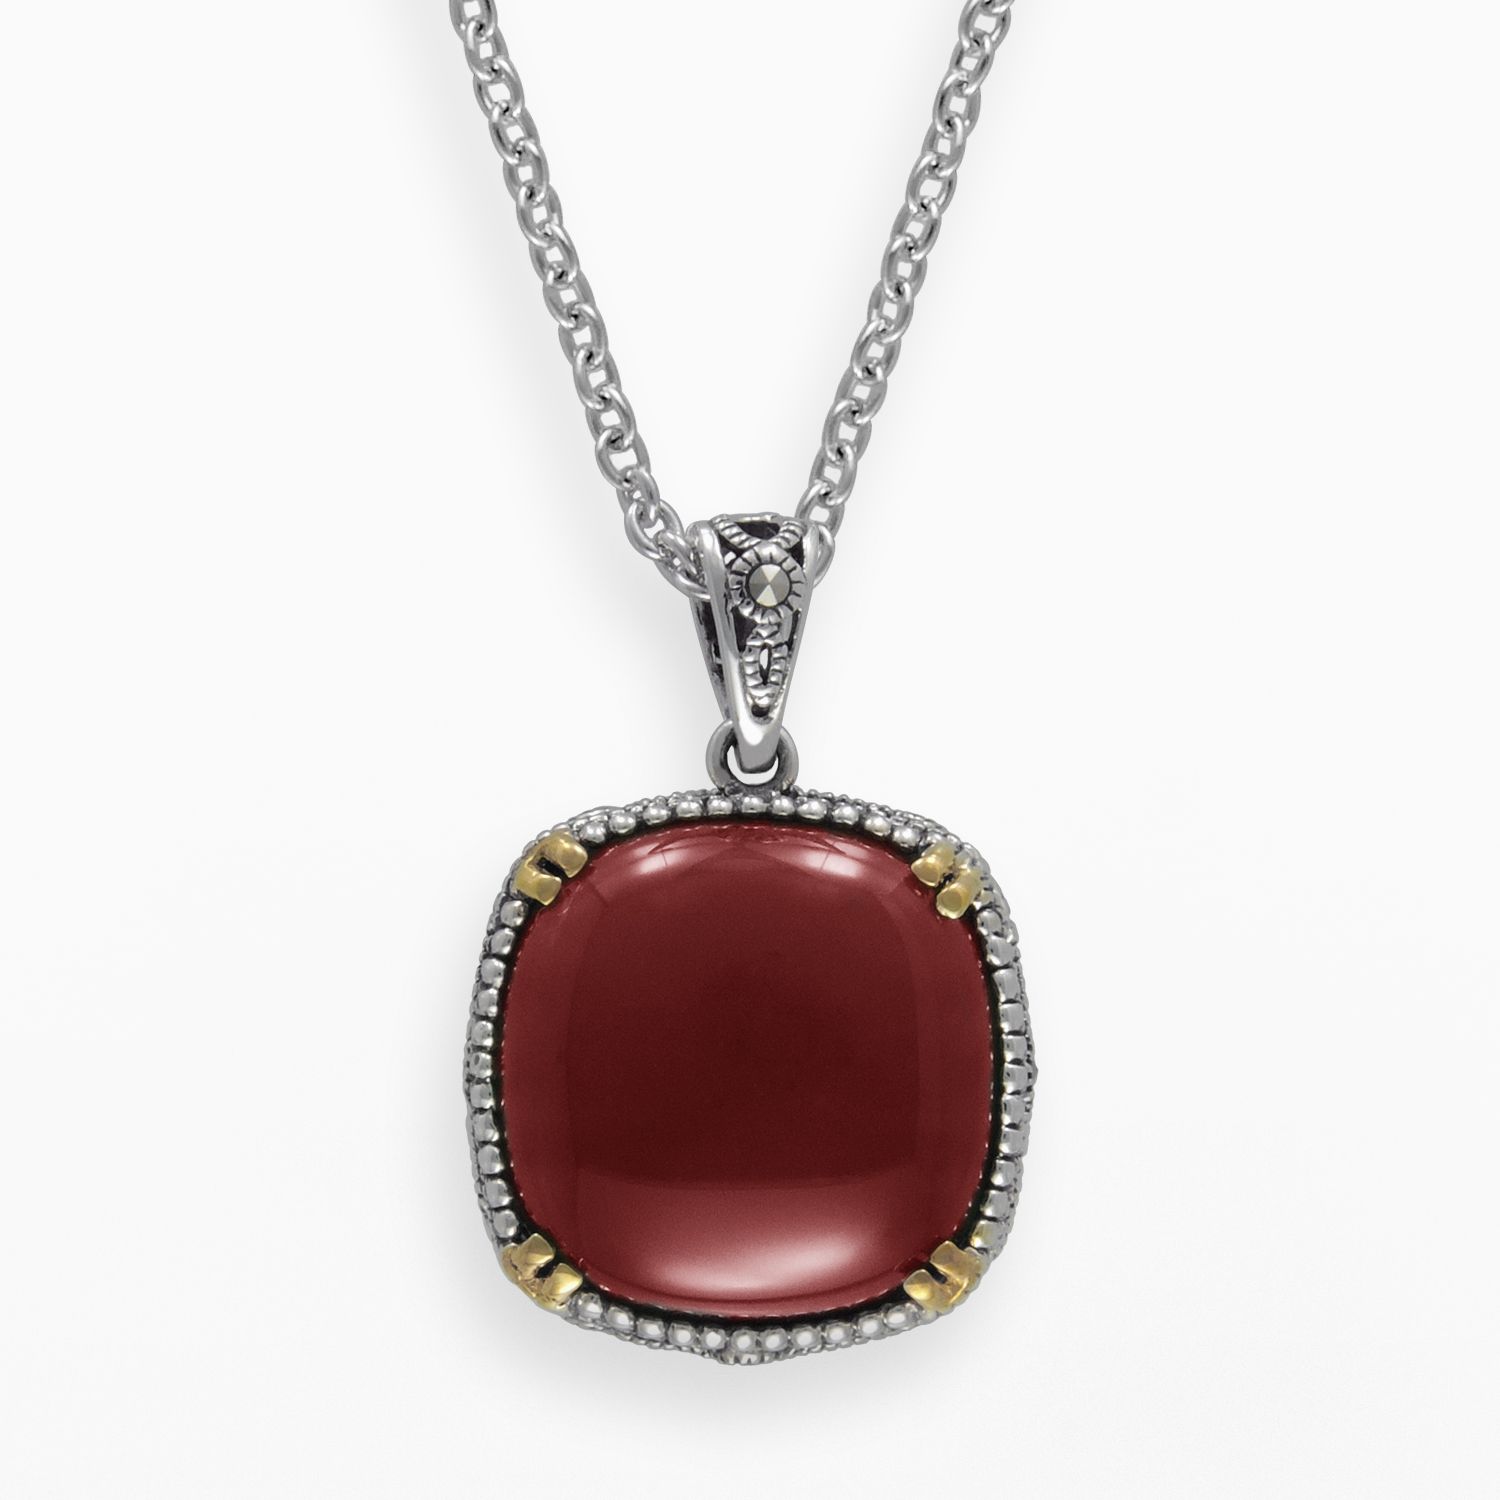 Image for Lavish by TJM 14k Gold Over Silver & Sterling Silver Agate Pendant - Made with Swarovski Marcasite at Kohl's.